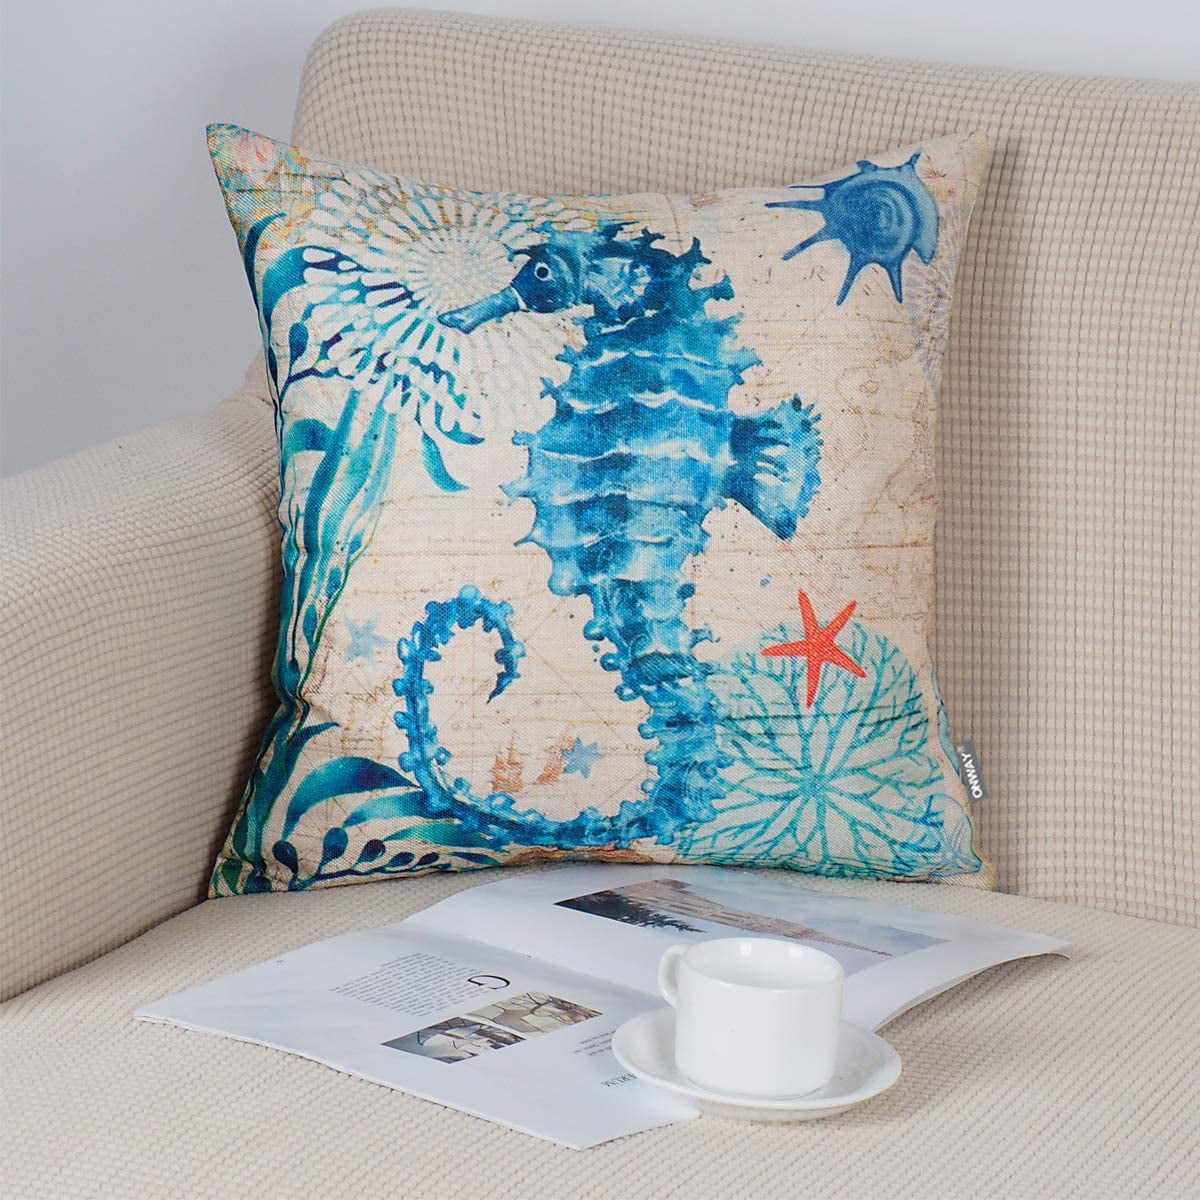 Sunjoy Tech Ocean Theme Pillow Covers 18x18in, Beach Coastal Decor Outdoor  Cushions Decorative Throw Pillow Covers for Couch, Sofa, Bed – Seahorse 